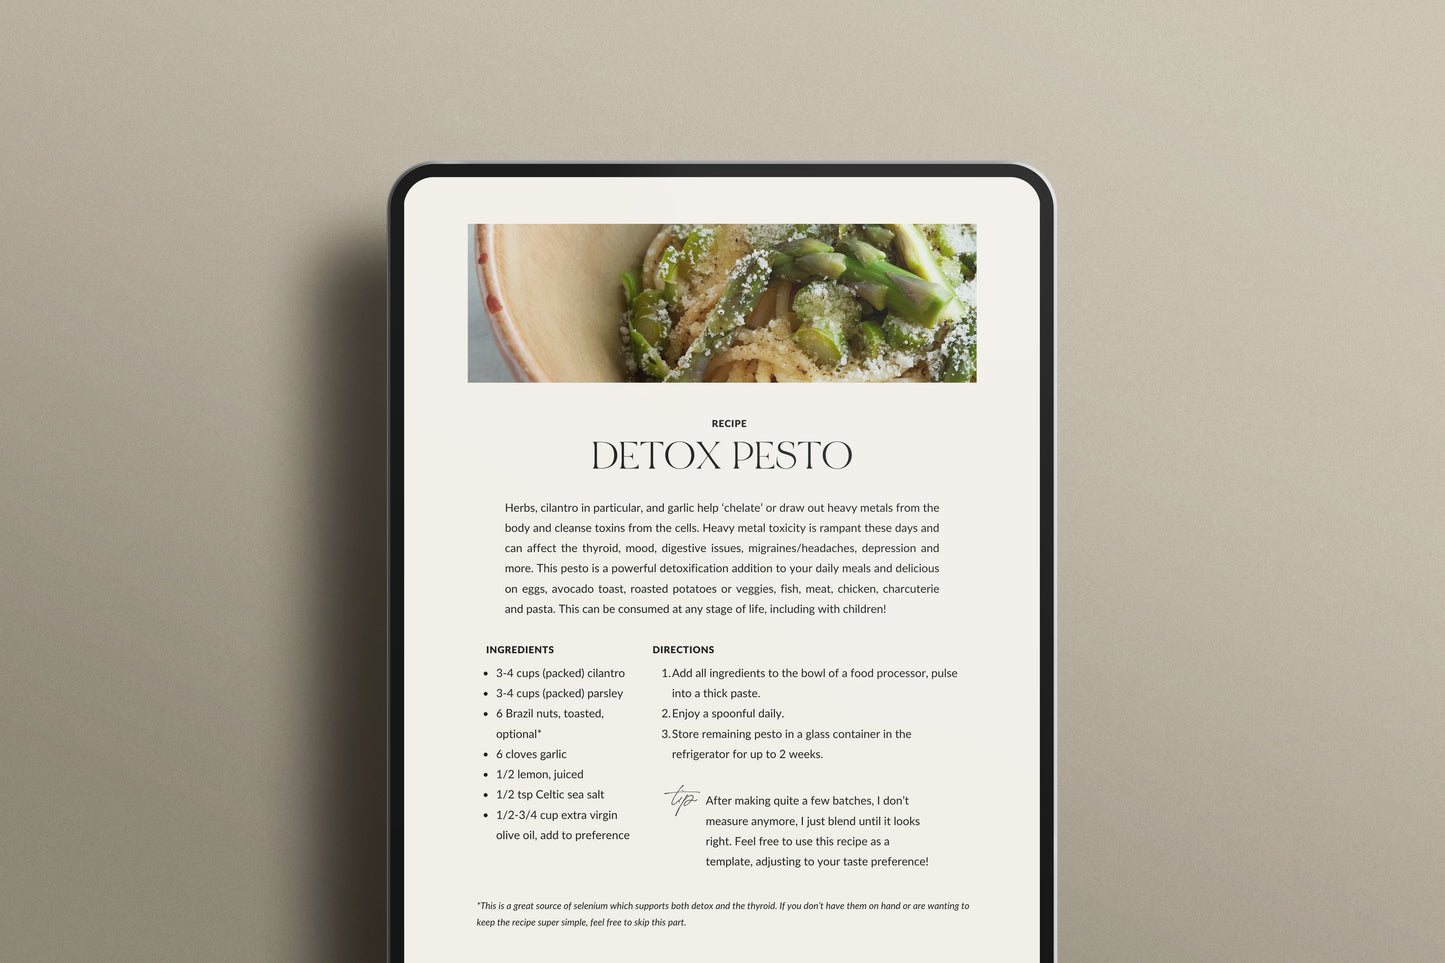 picture of the holistic migrain relief guide opened on a iPad, on a page of a Detox Pesto recipe